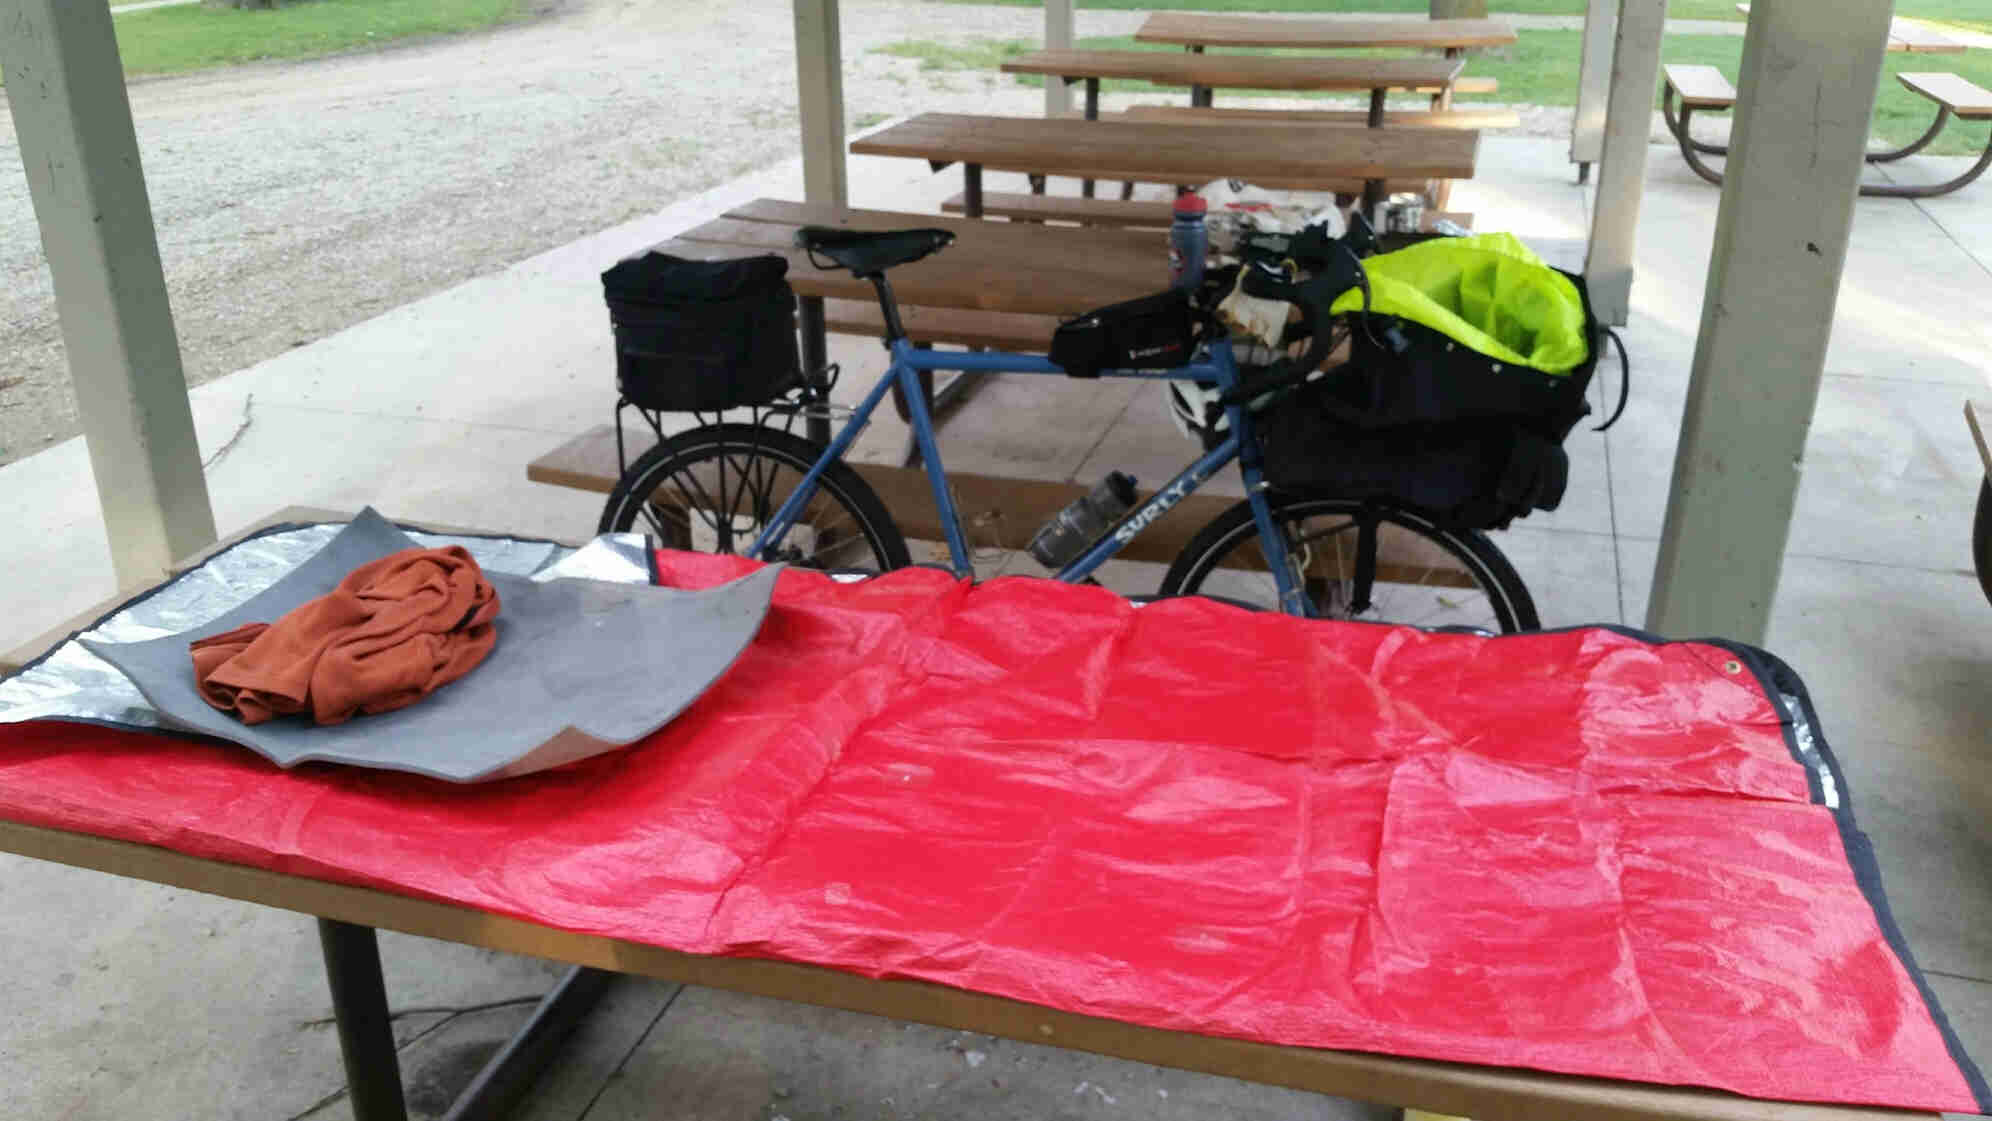 Red tarp laying across a picnic table, with a Surly bike behind it, and row of picnic tables in the background